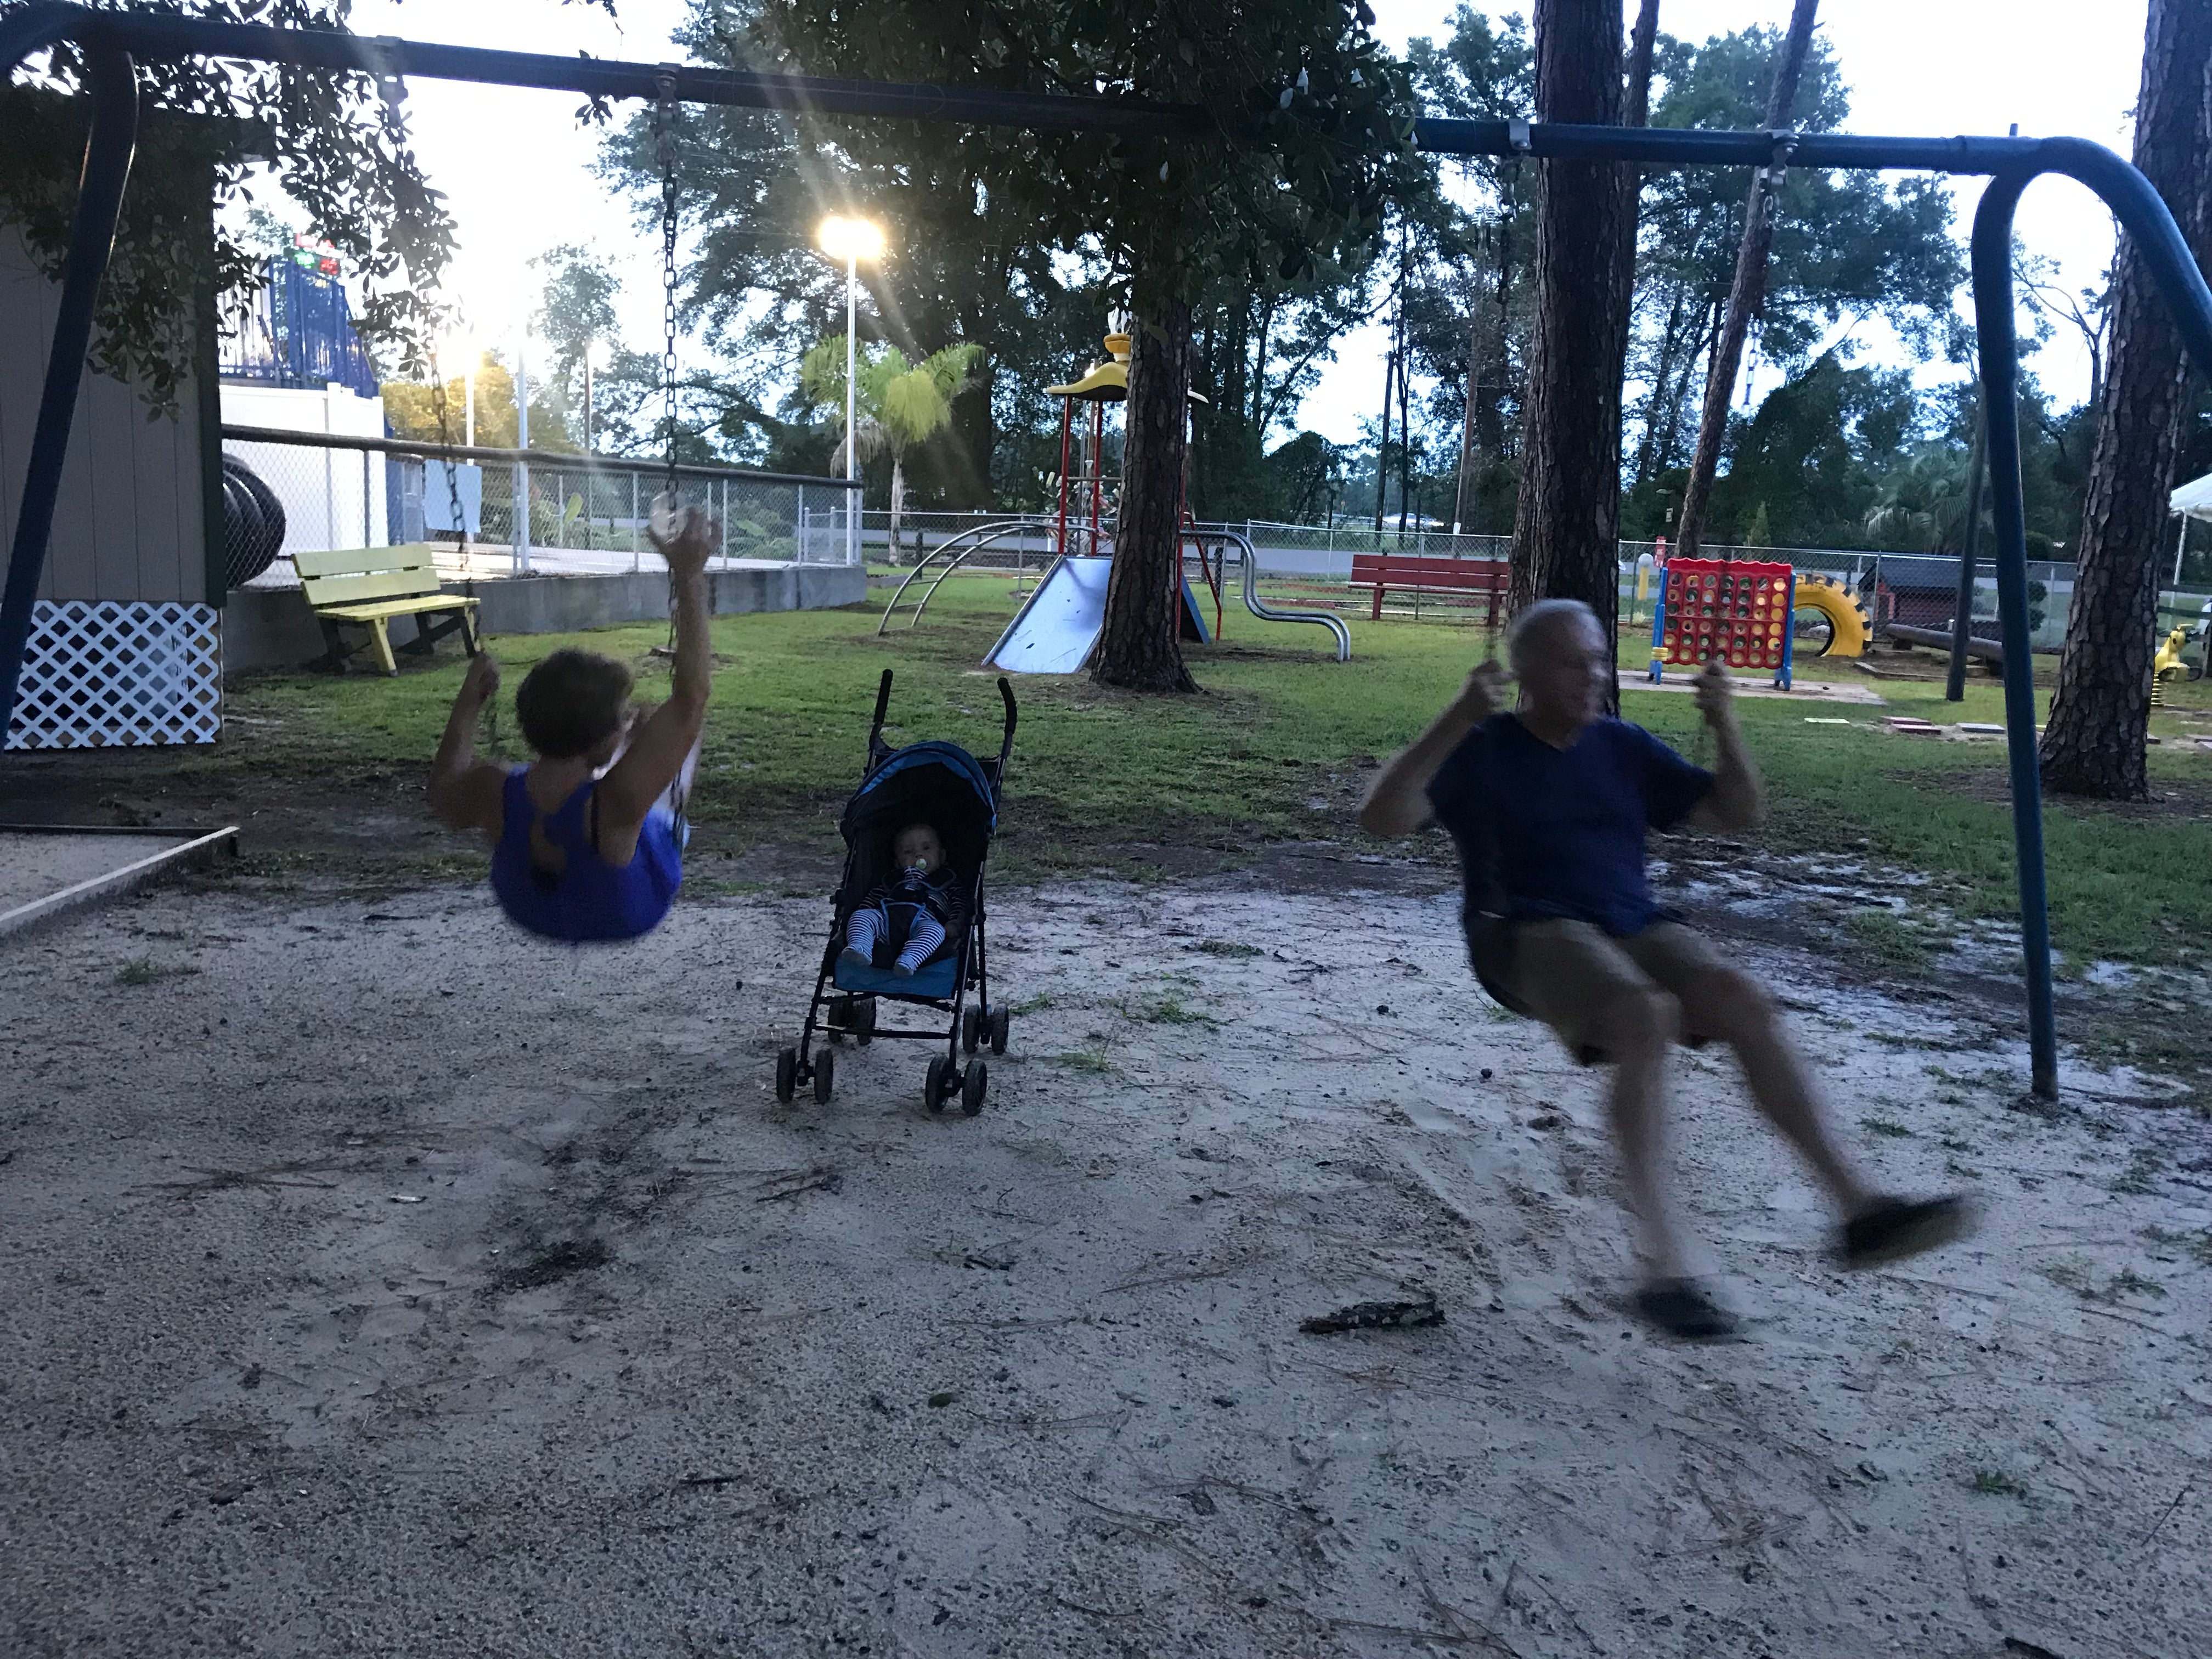 Never too old to play on the playground